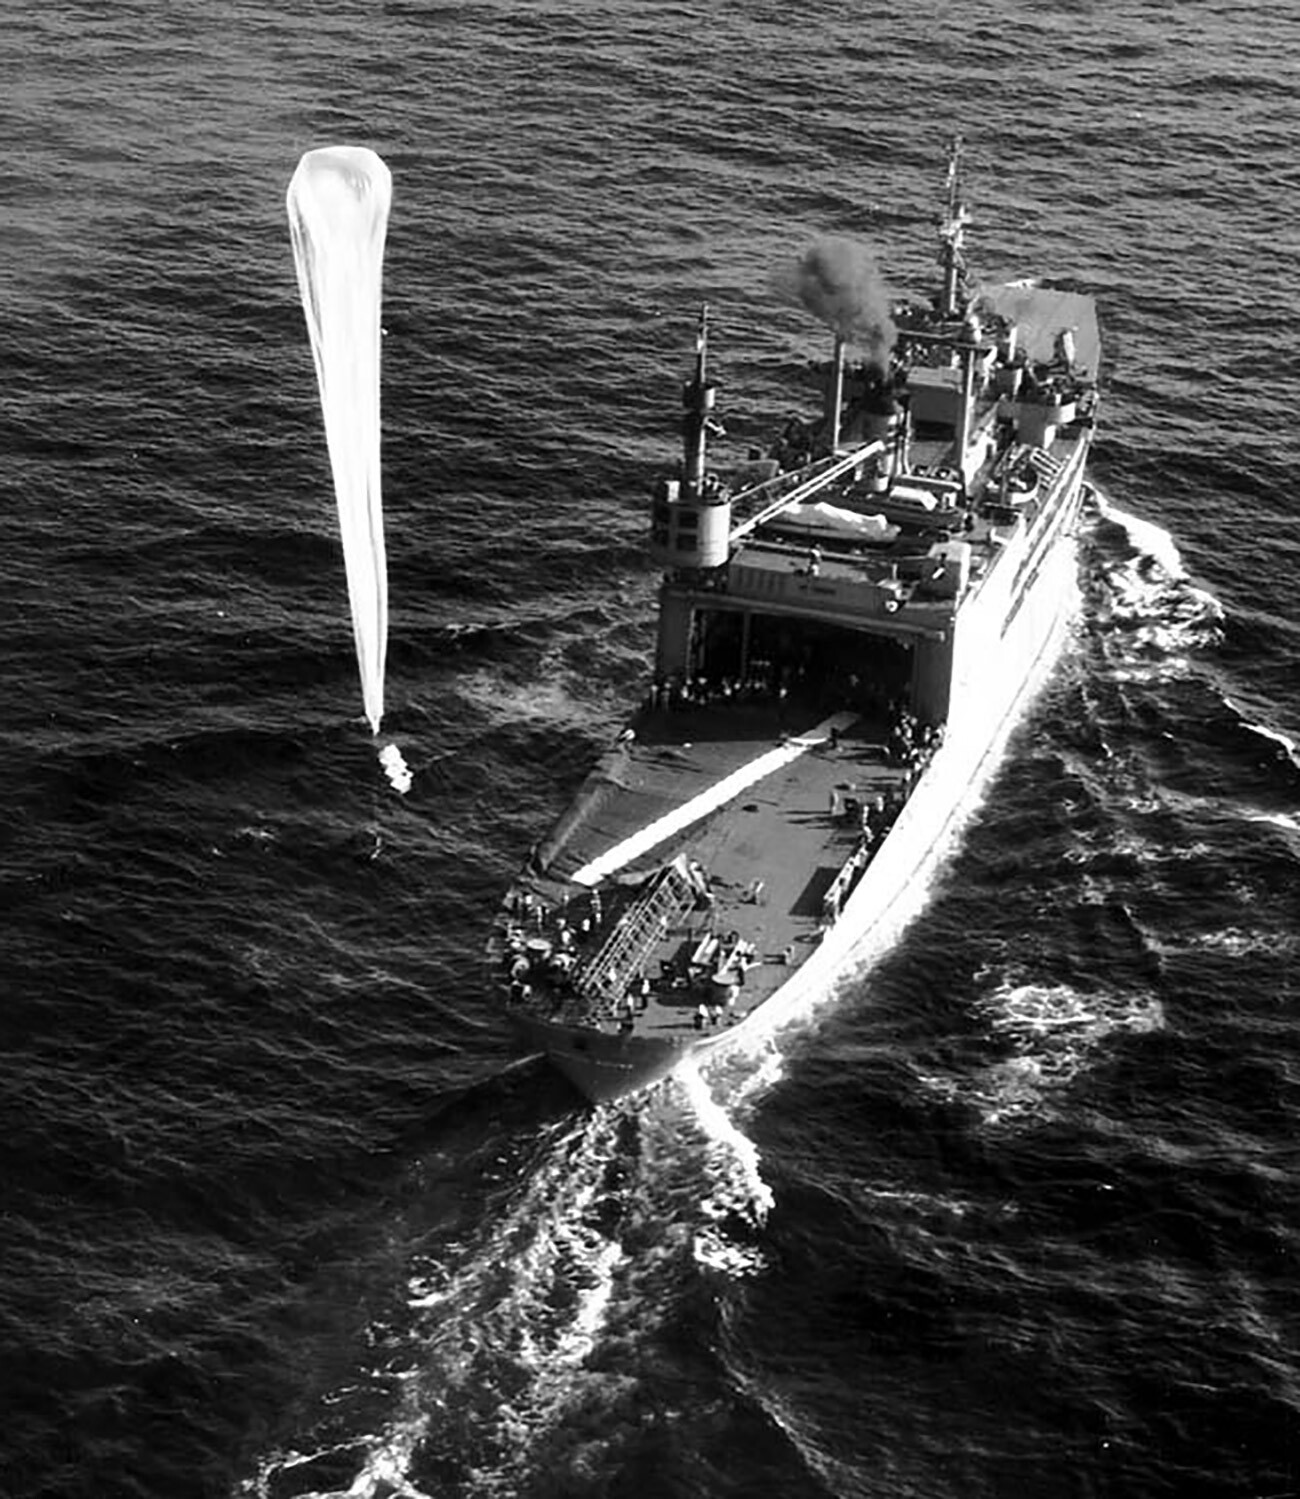 Skyhook balloon leaving the deck of the USS Norton Sound (AVM-1) on March 31, 1949.